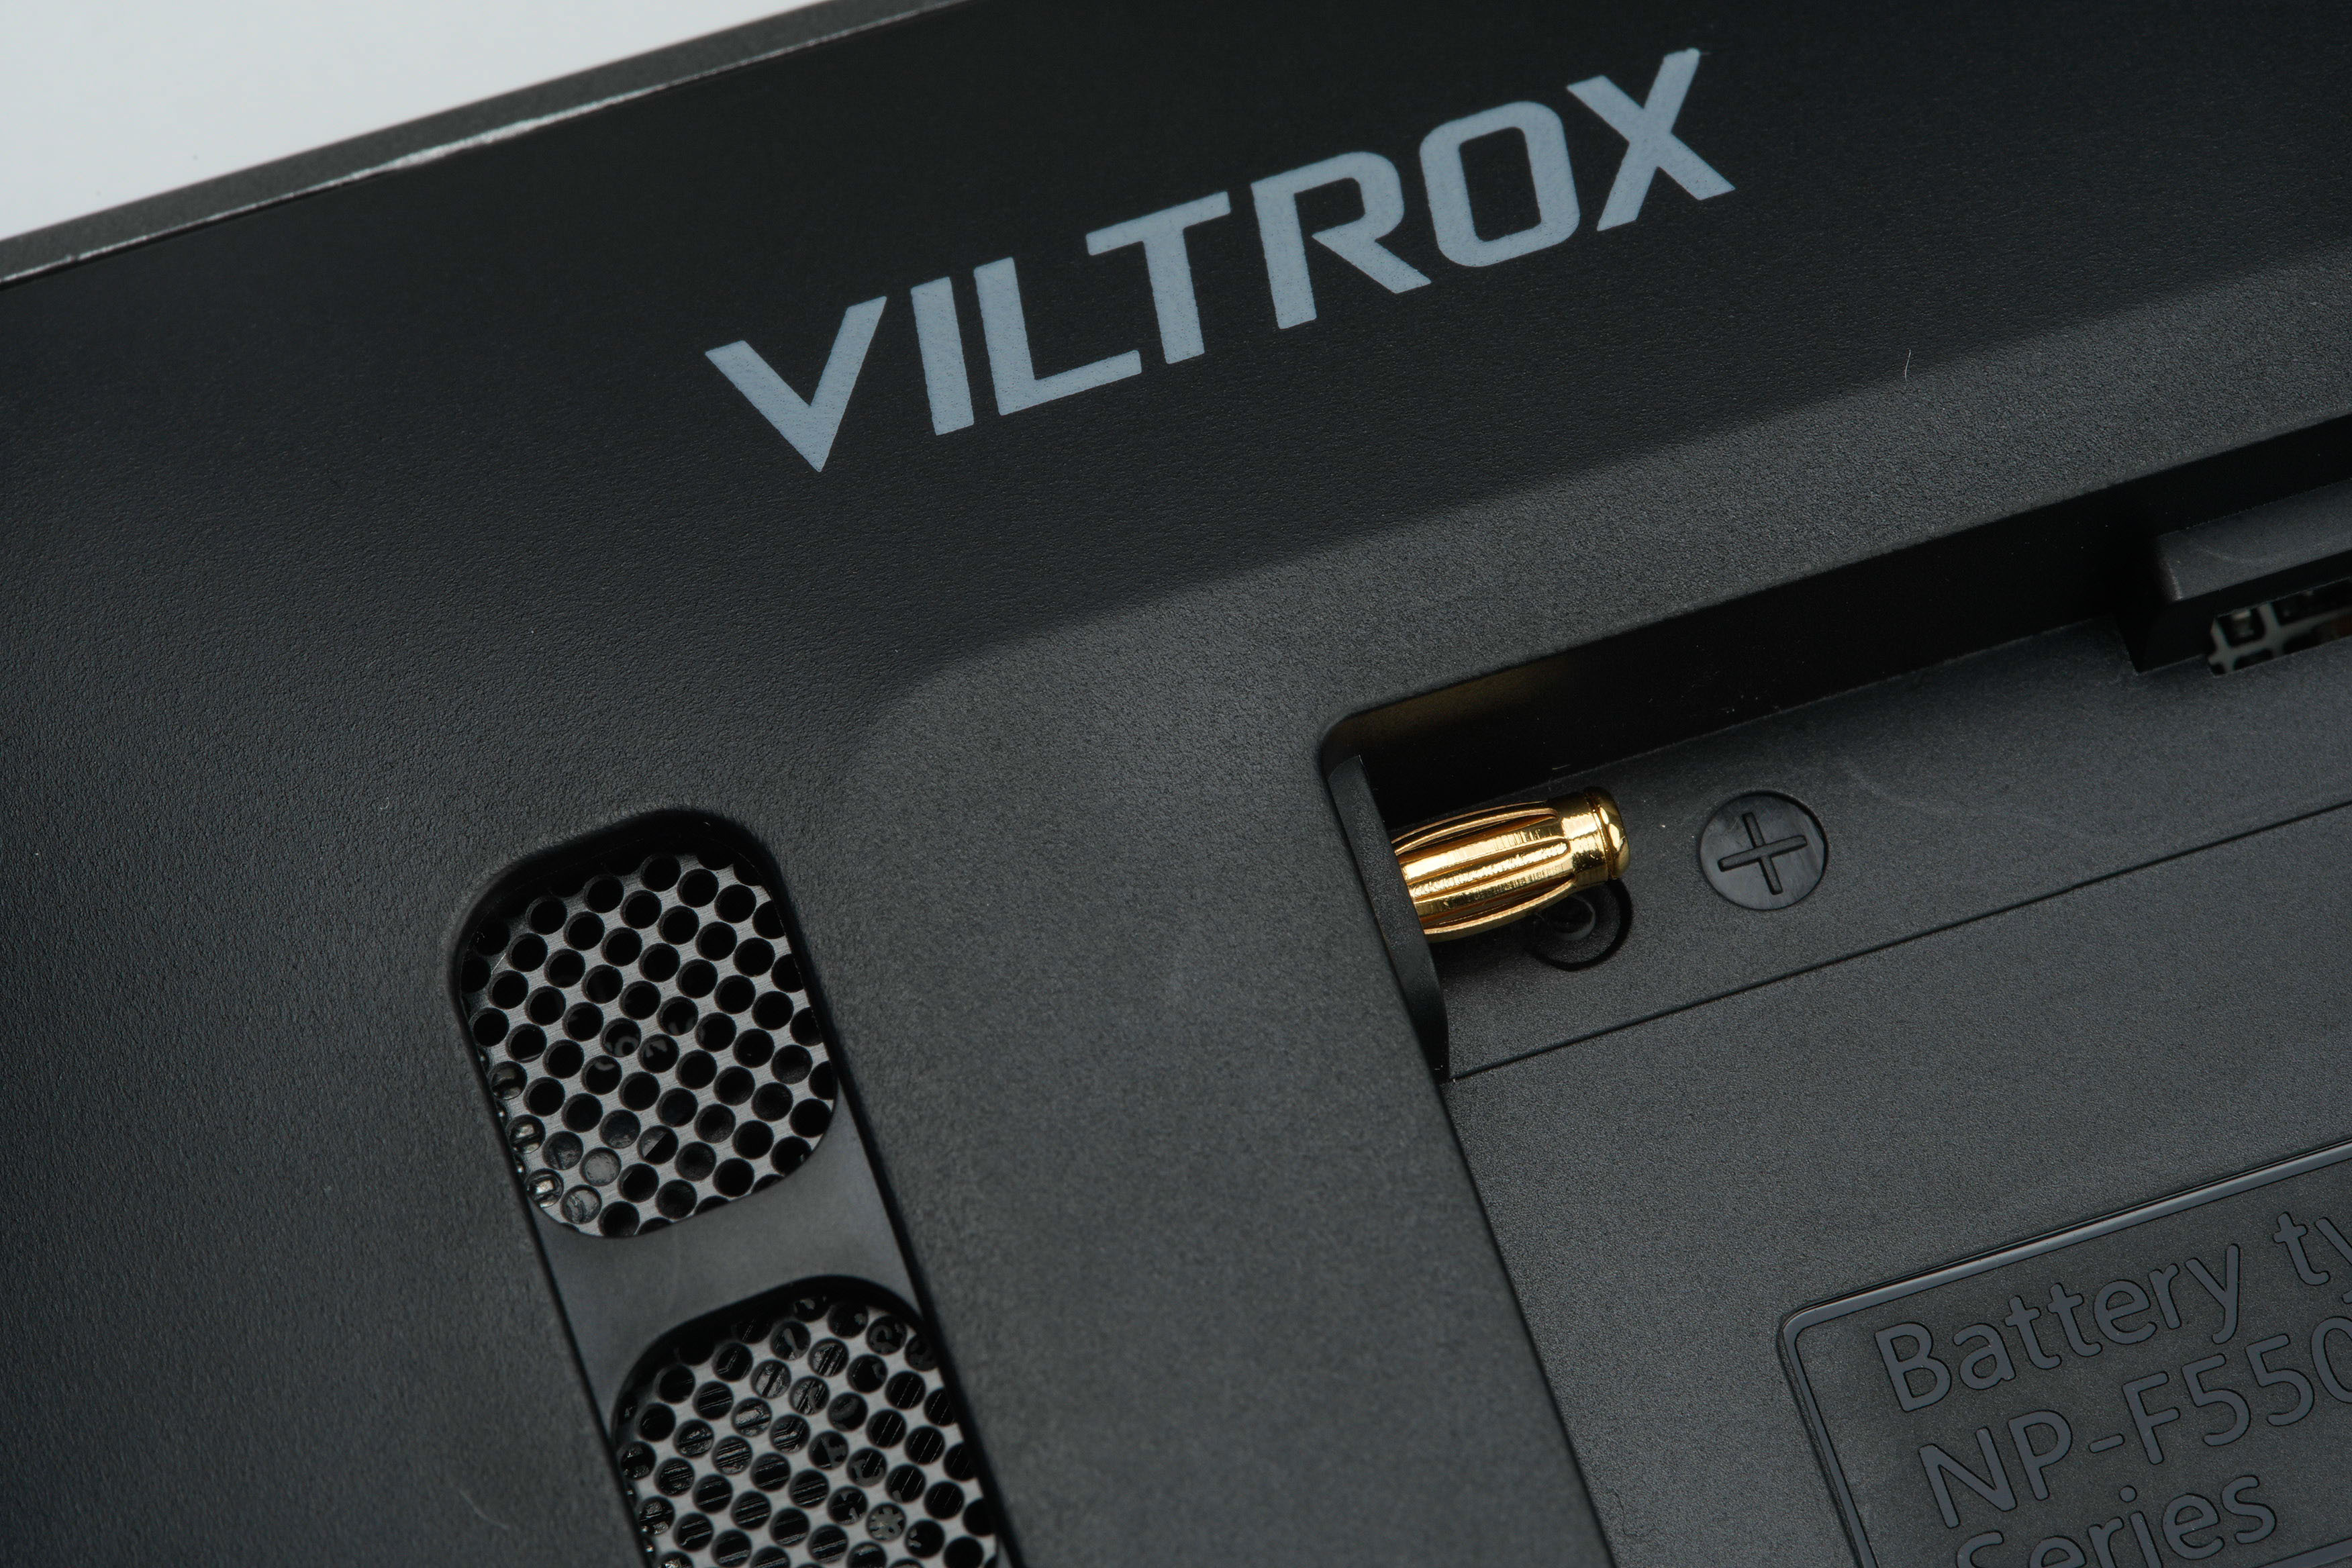 Viltrox 5" Touch Screen Panel Monitor with 3D LUT